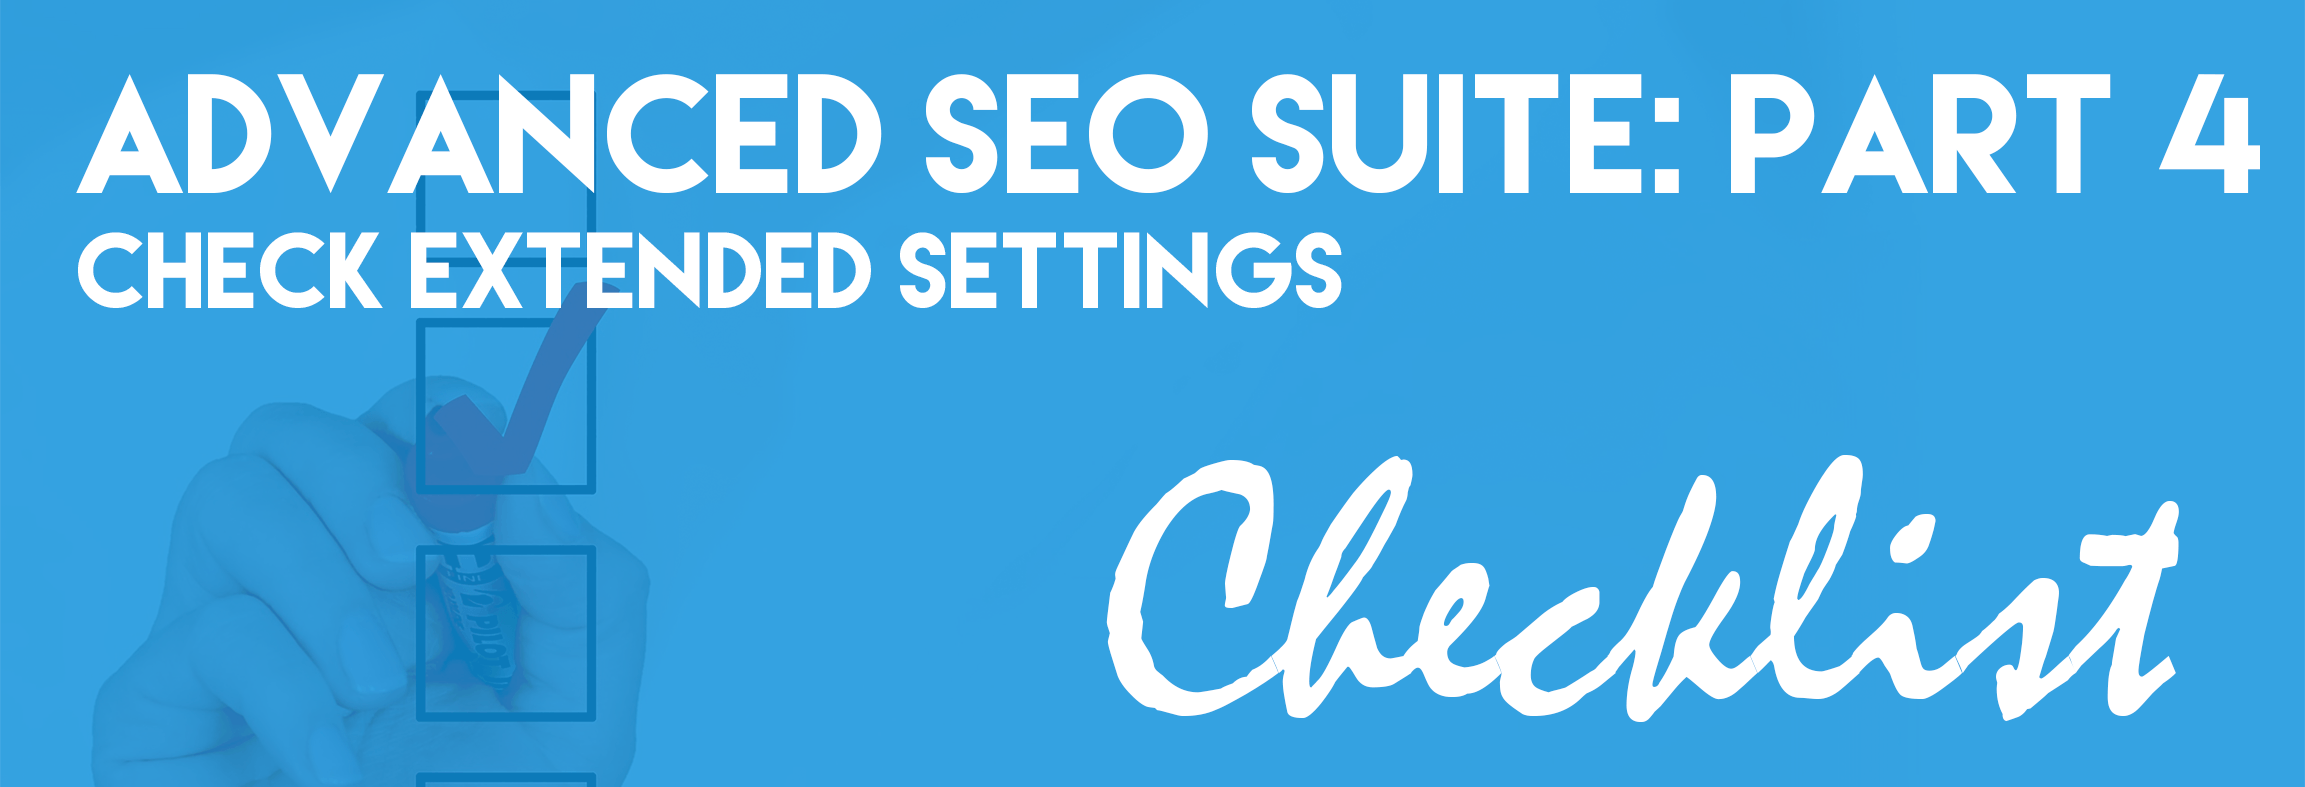 Advanced SEO Suite Onboarding Checklist (Part 4): Check Extended settings